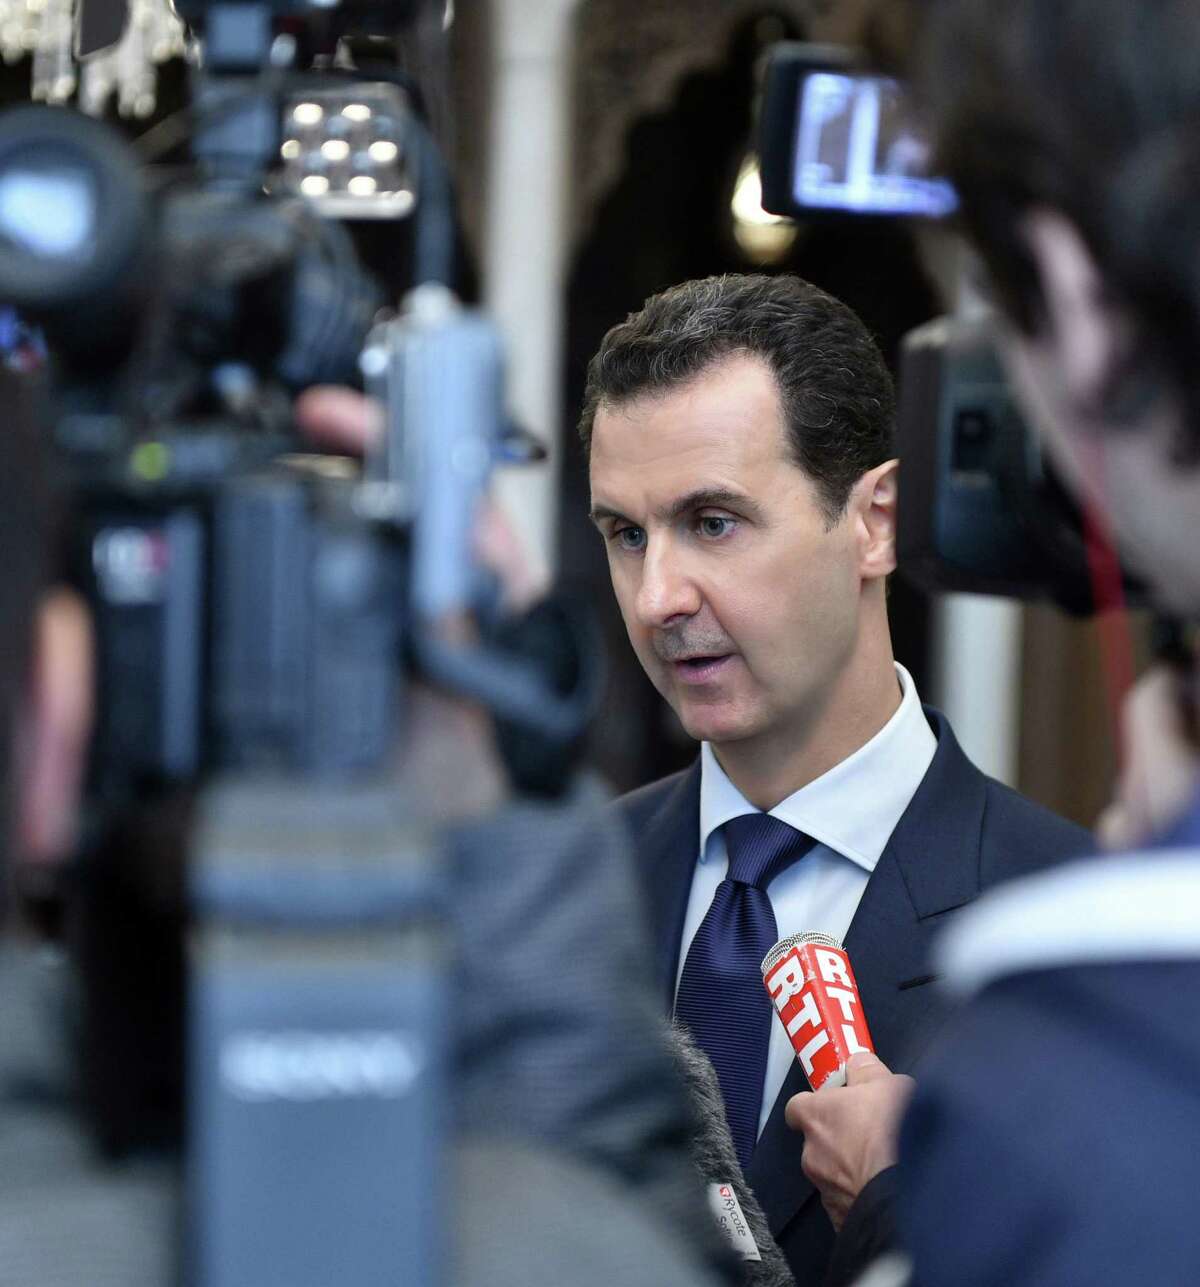 Syrian President Bashar Assad decried a U.S. missile strike early Friday, April 7 on a government-controlled air base where U.S. officials say the Syrian military launched a deadly chemical attack earlier this week. Syria called the operation “an aggression” that killed at least six people. Removing Assad will cause a vacuum that will result in more bloodshed and suffering.